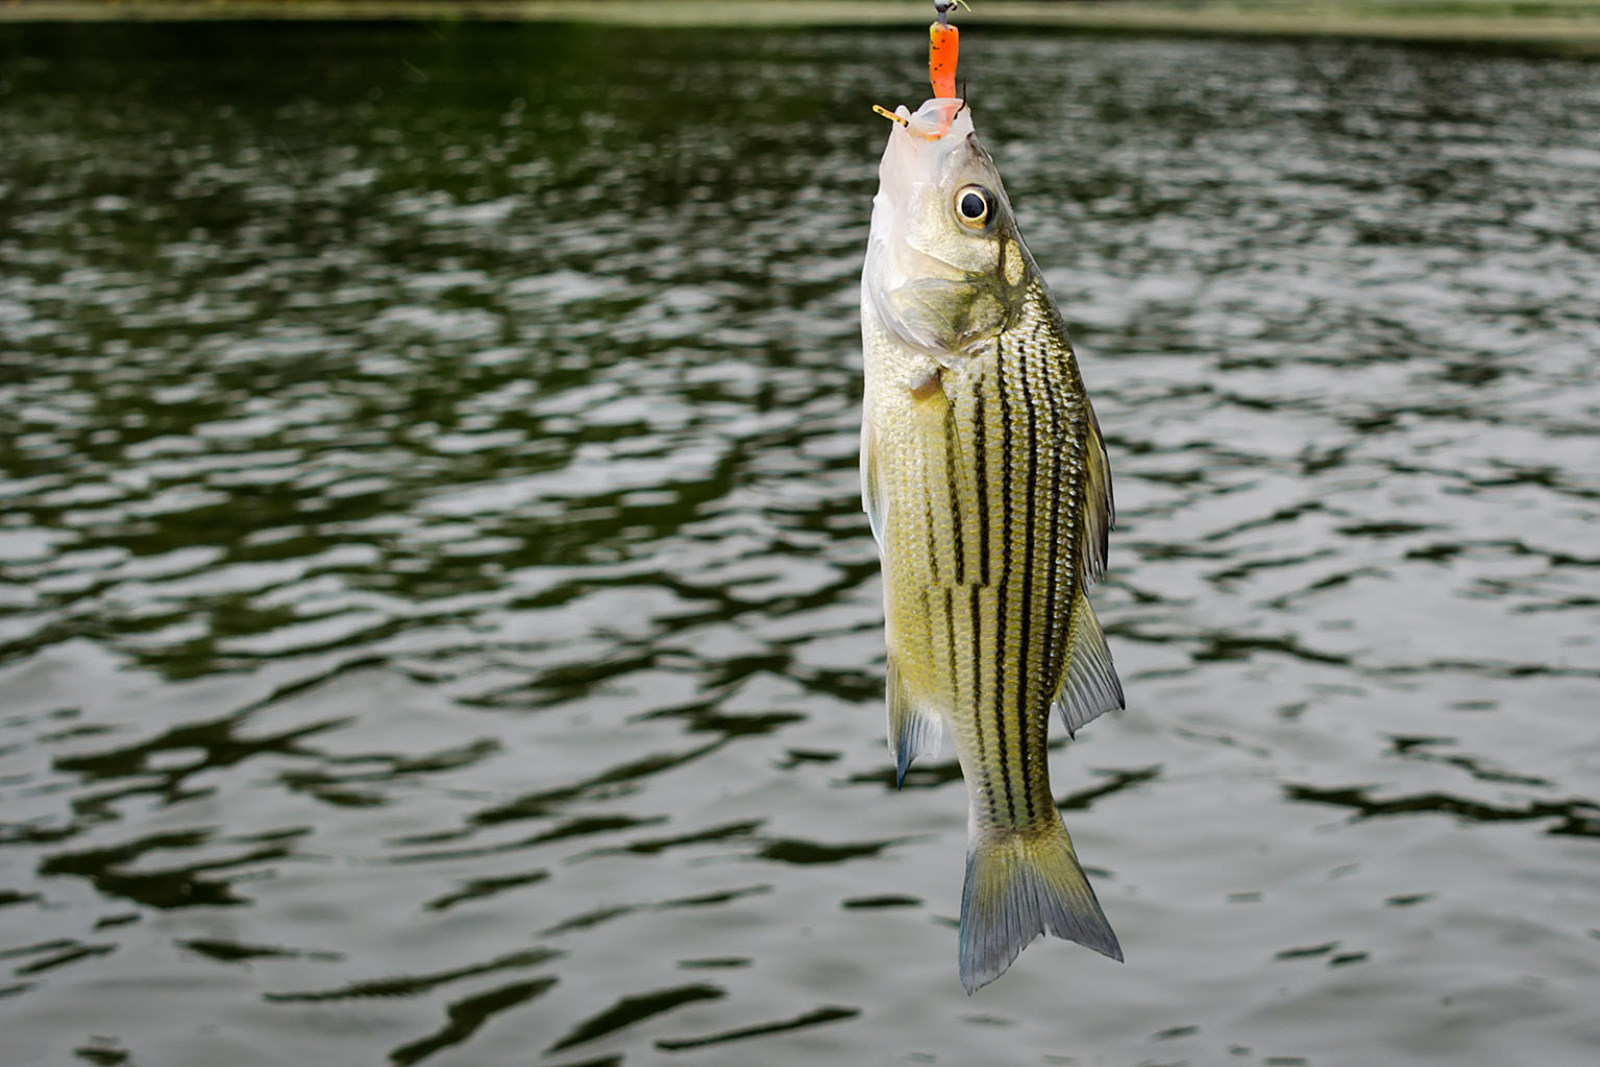 Striped Bass - Buggs Fishing Lures